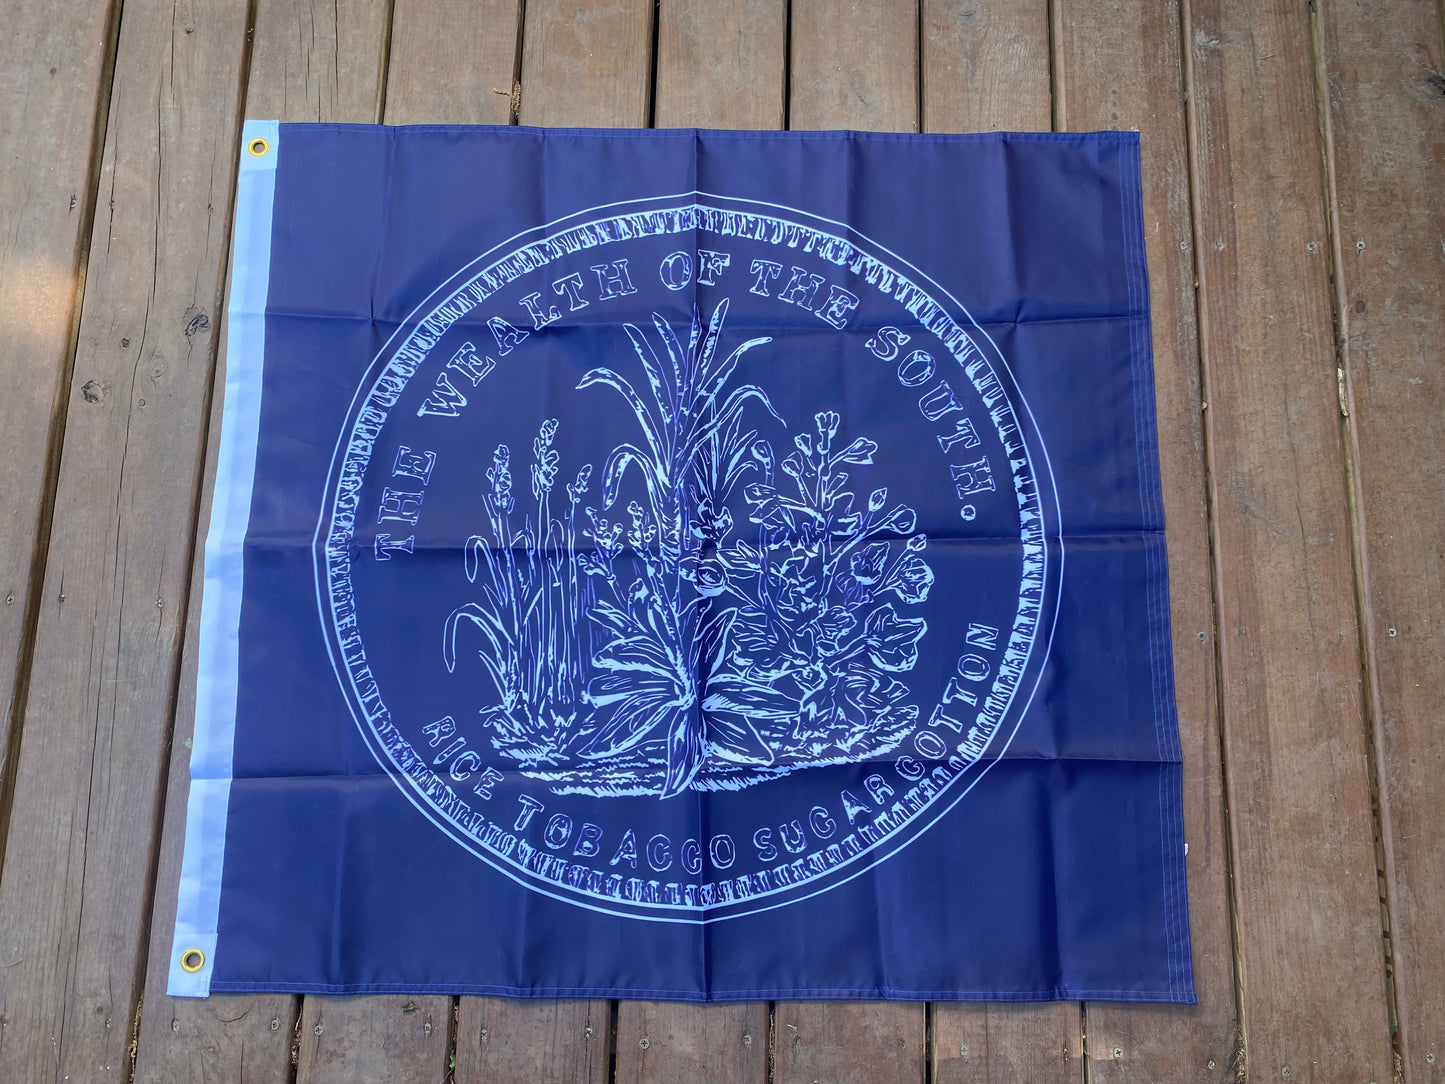 "Wealth of the South" House Flags